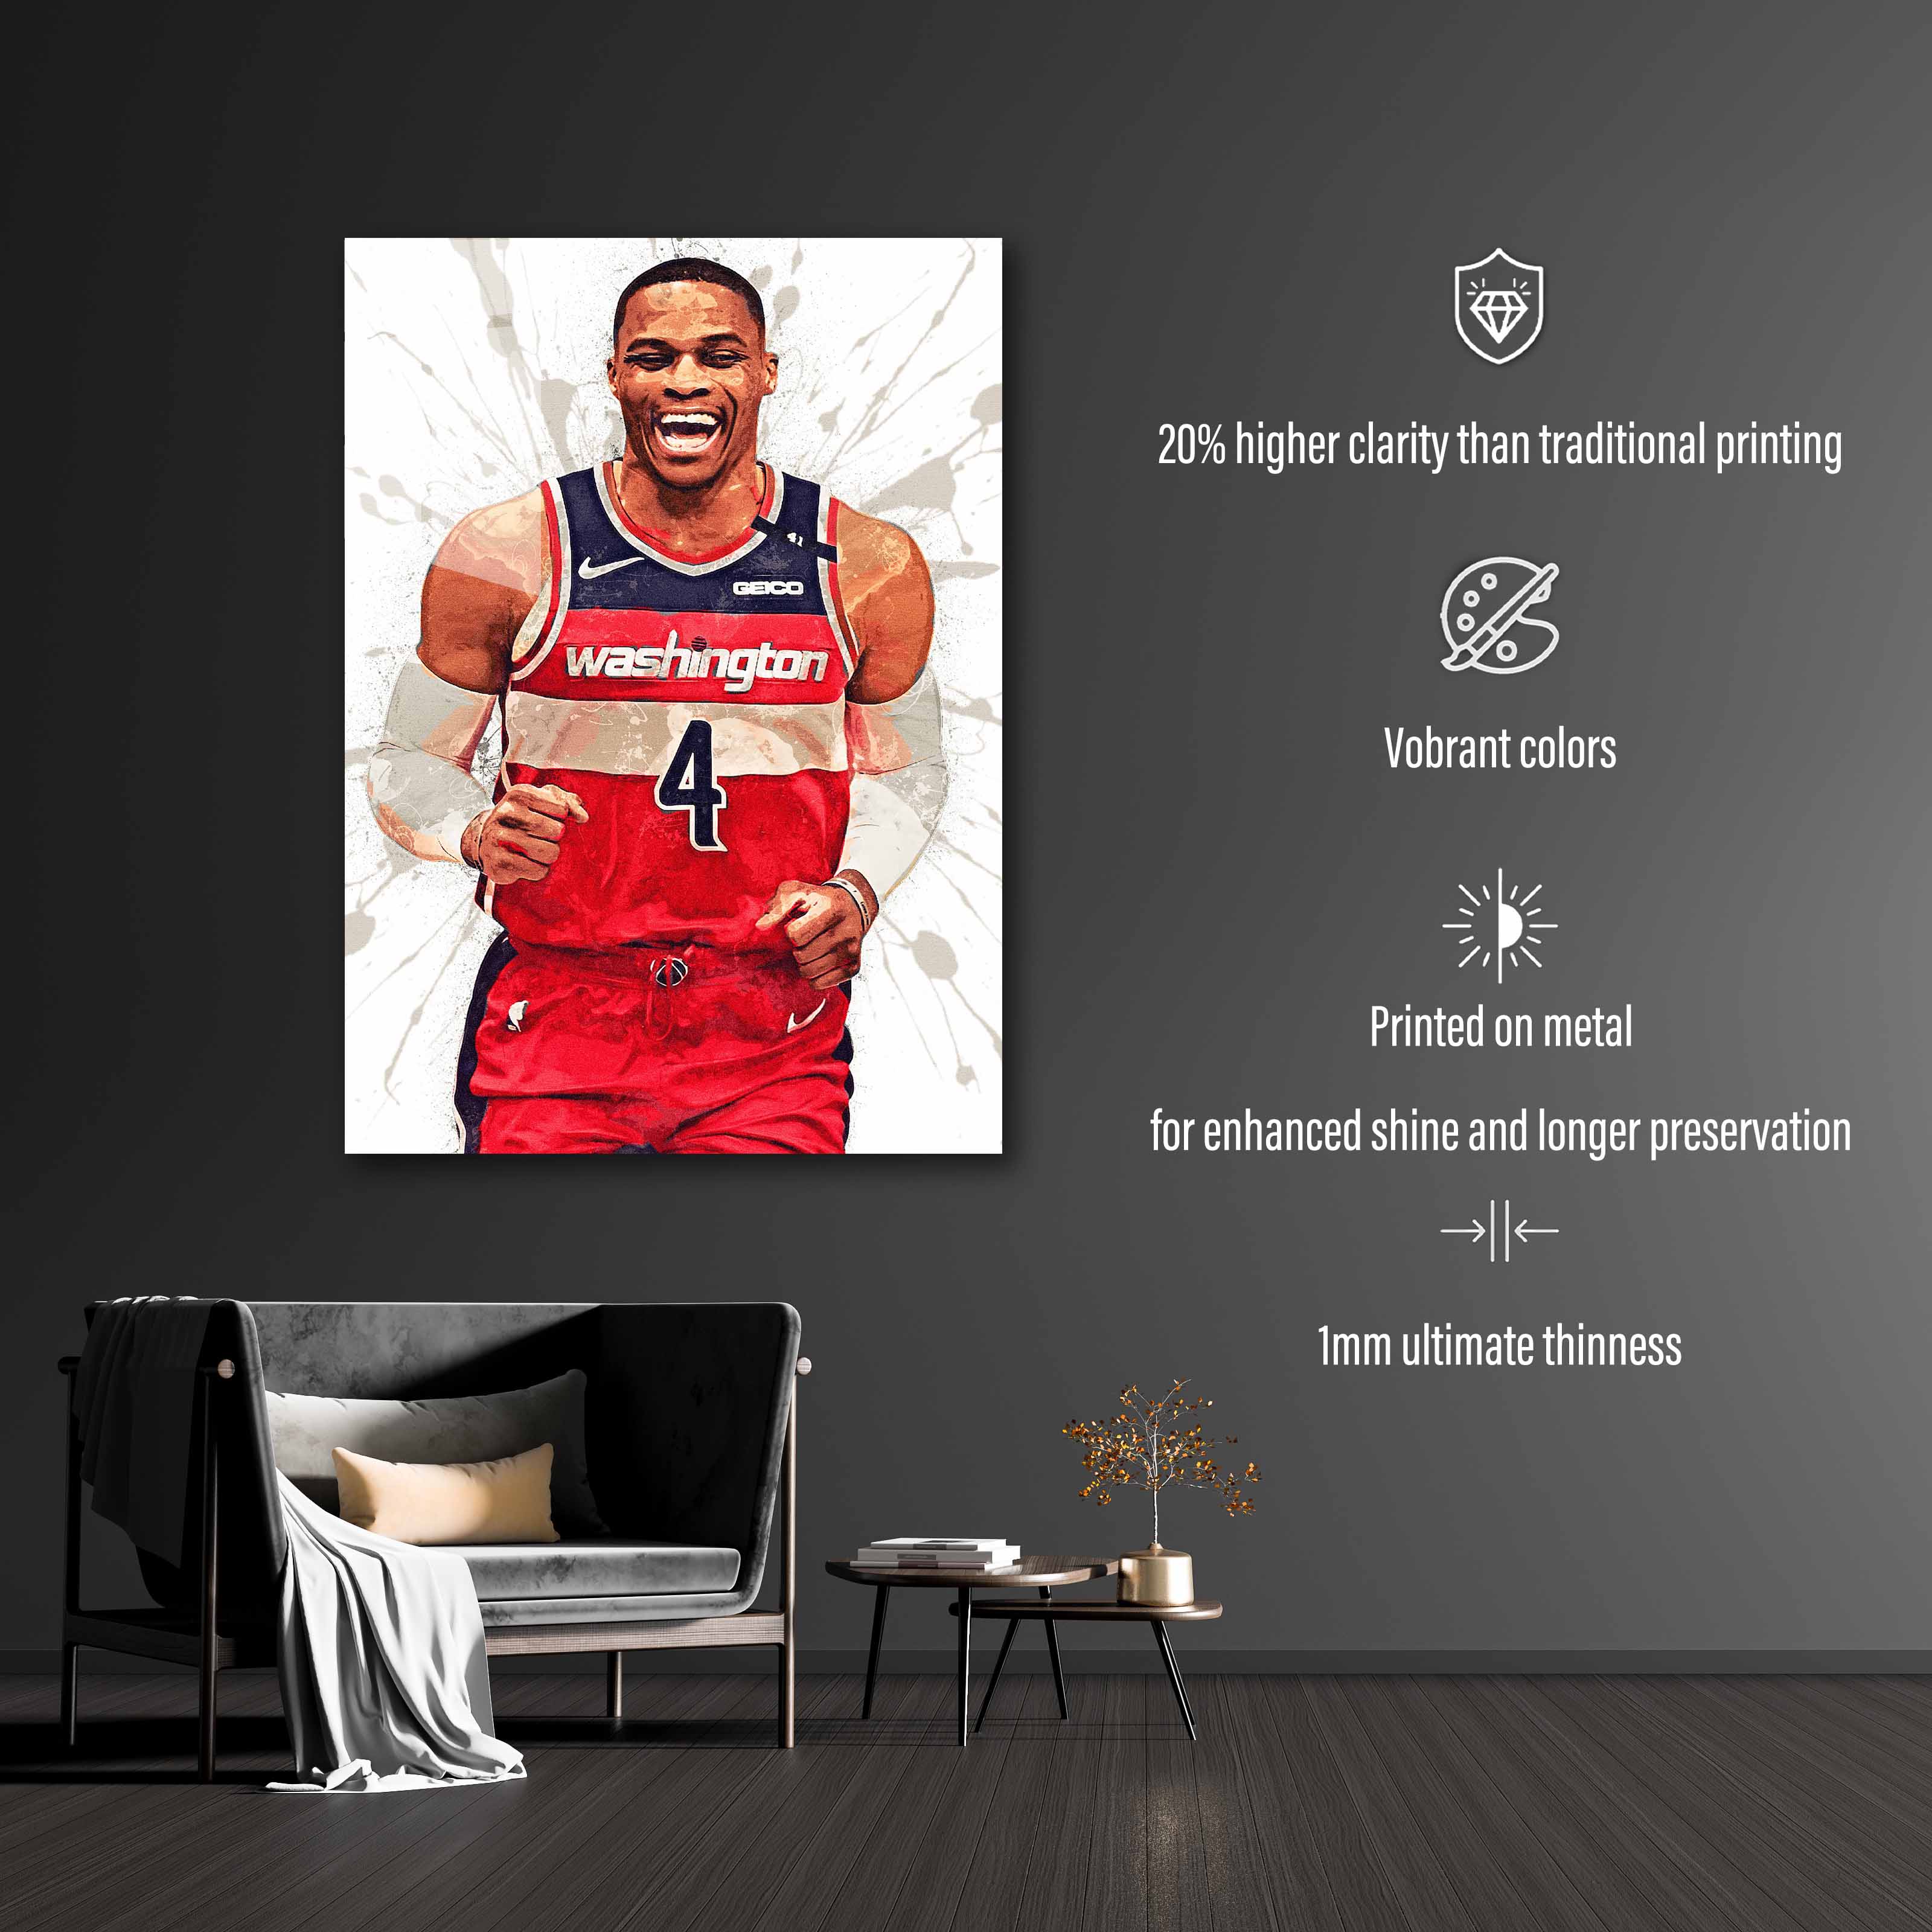 Russell Westbrook Washington Wizards-designed by @Hoang Van Thuan